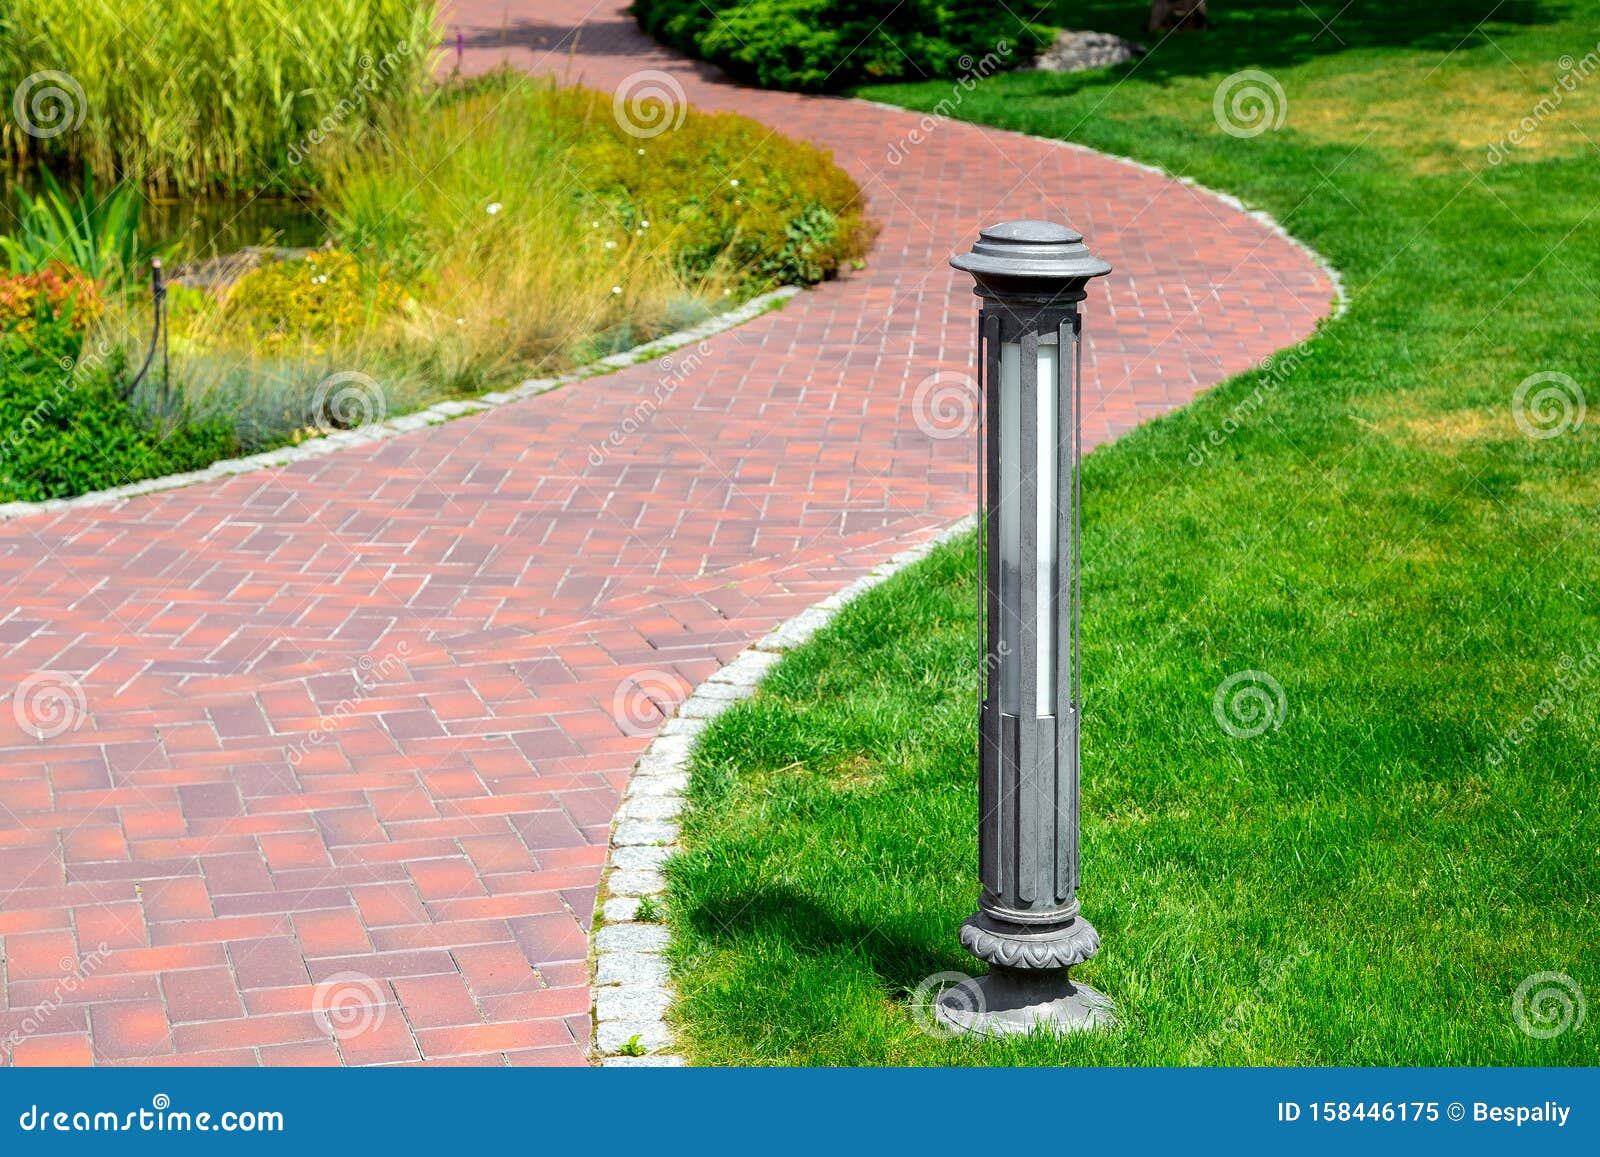 Ground Street Lamp Mounted on a Green Lawn in a Park. Stock Image